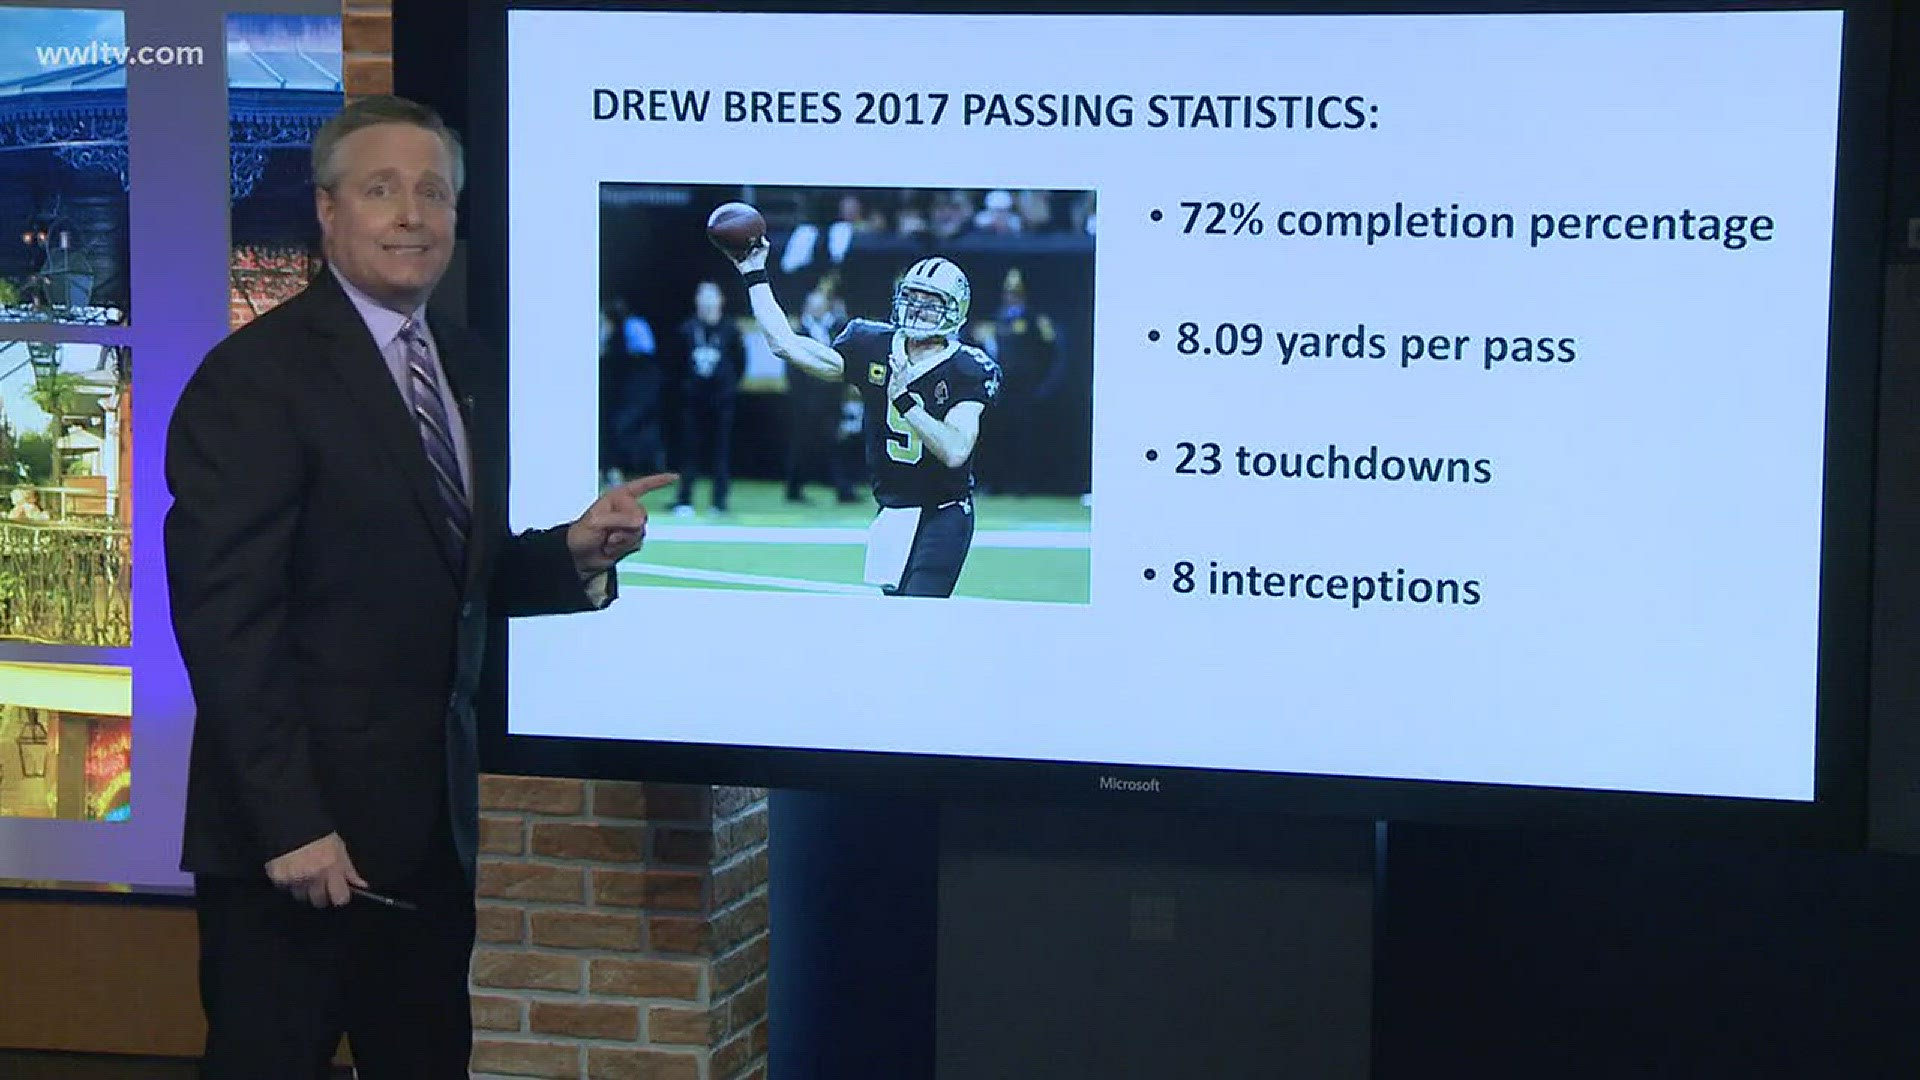 Doug Mouton discusses why Drew Brees is the best bargain quarterback in the NFL.